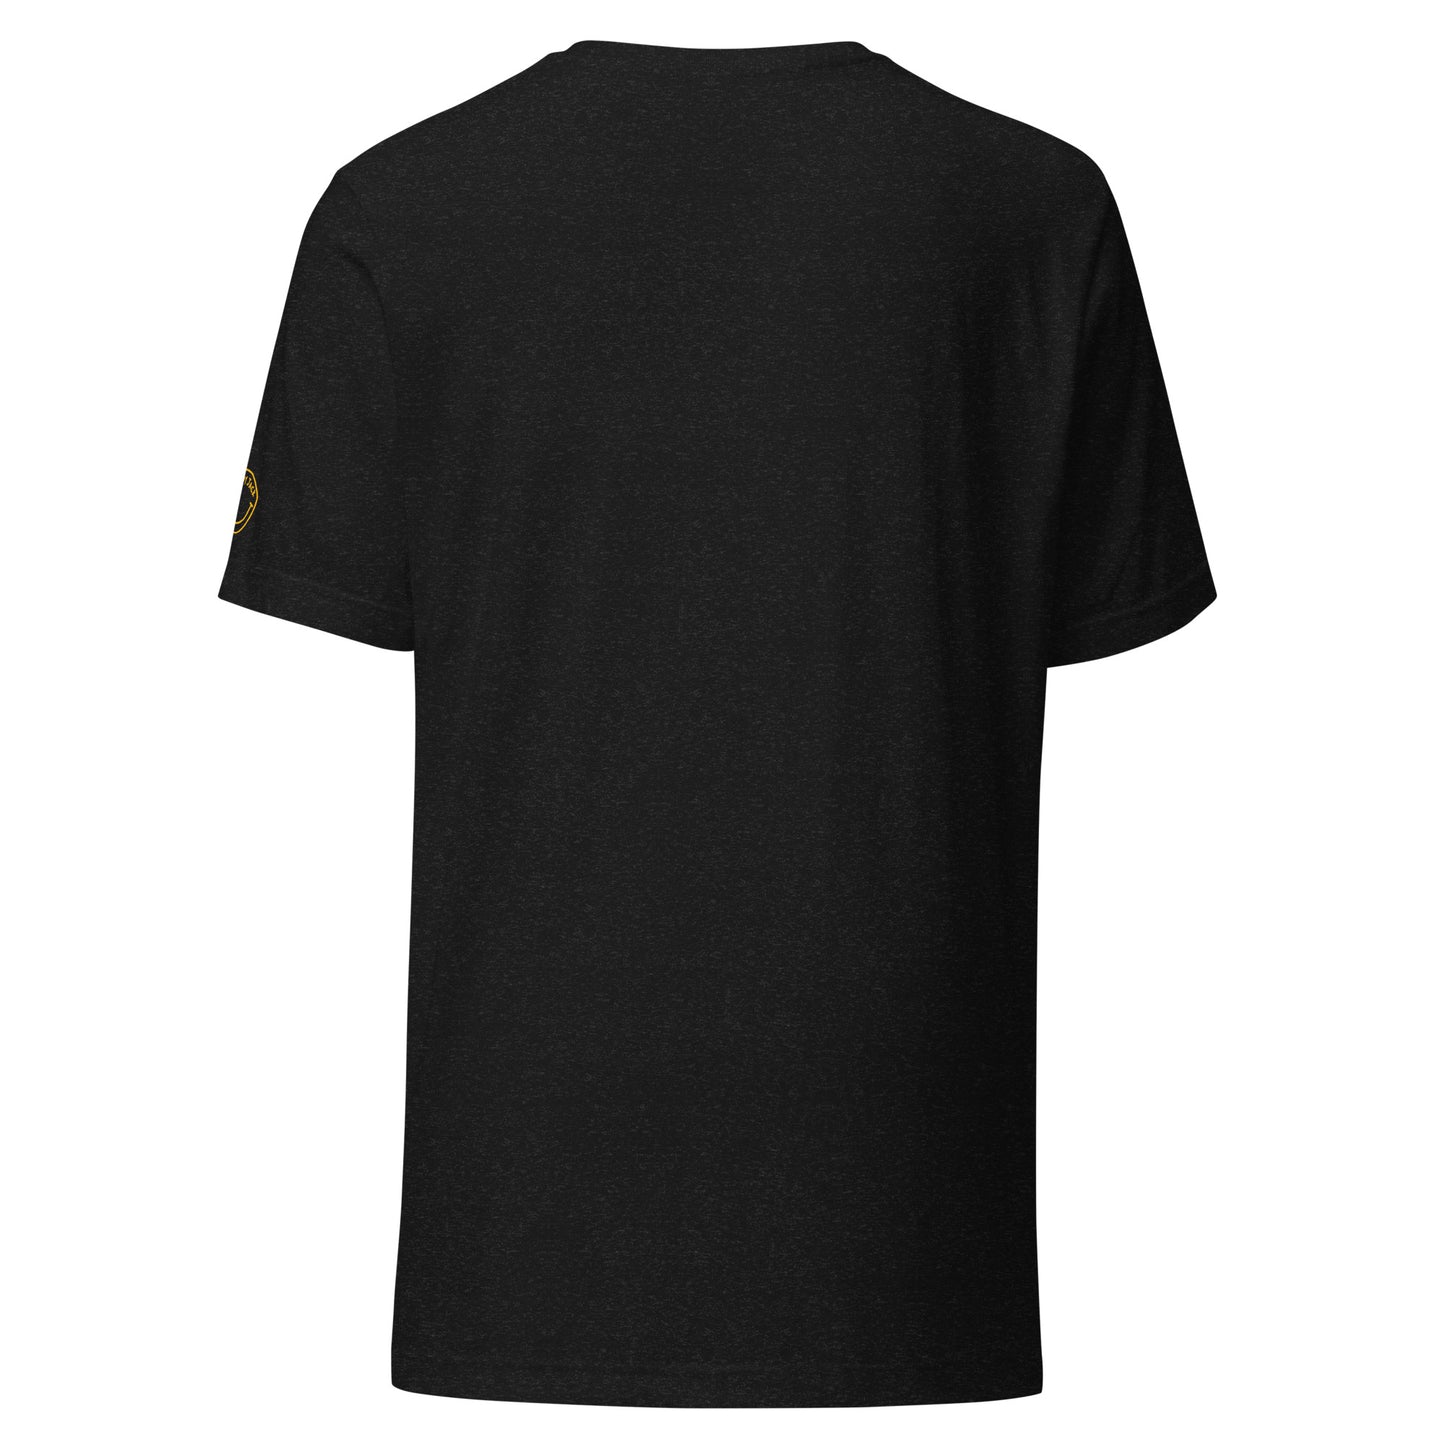 Taped off Tee (10 colors)